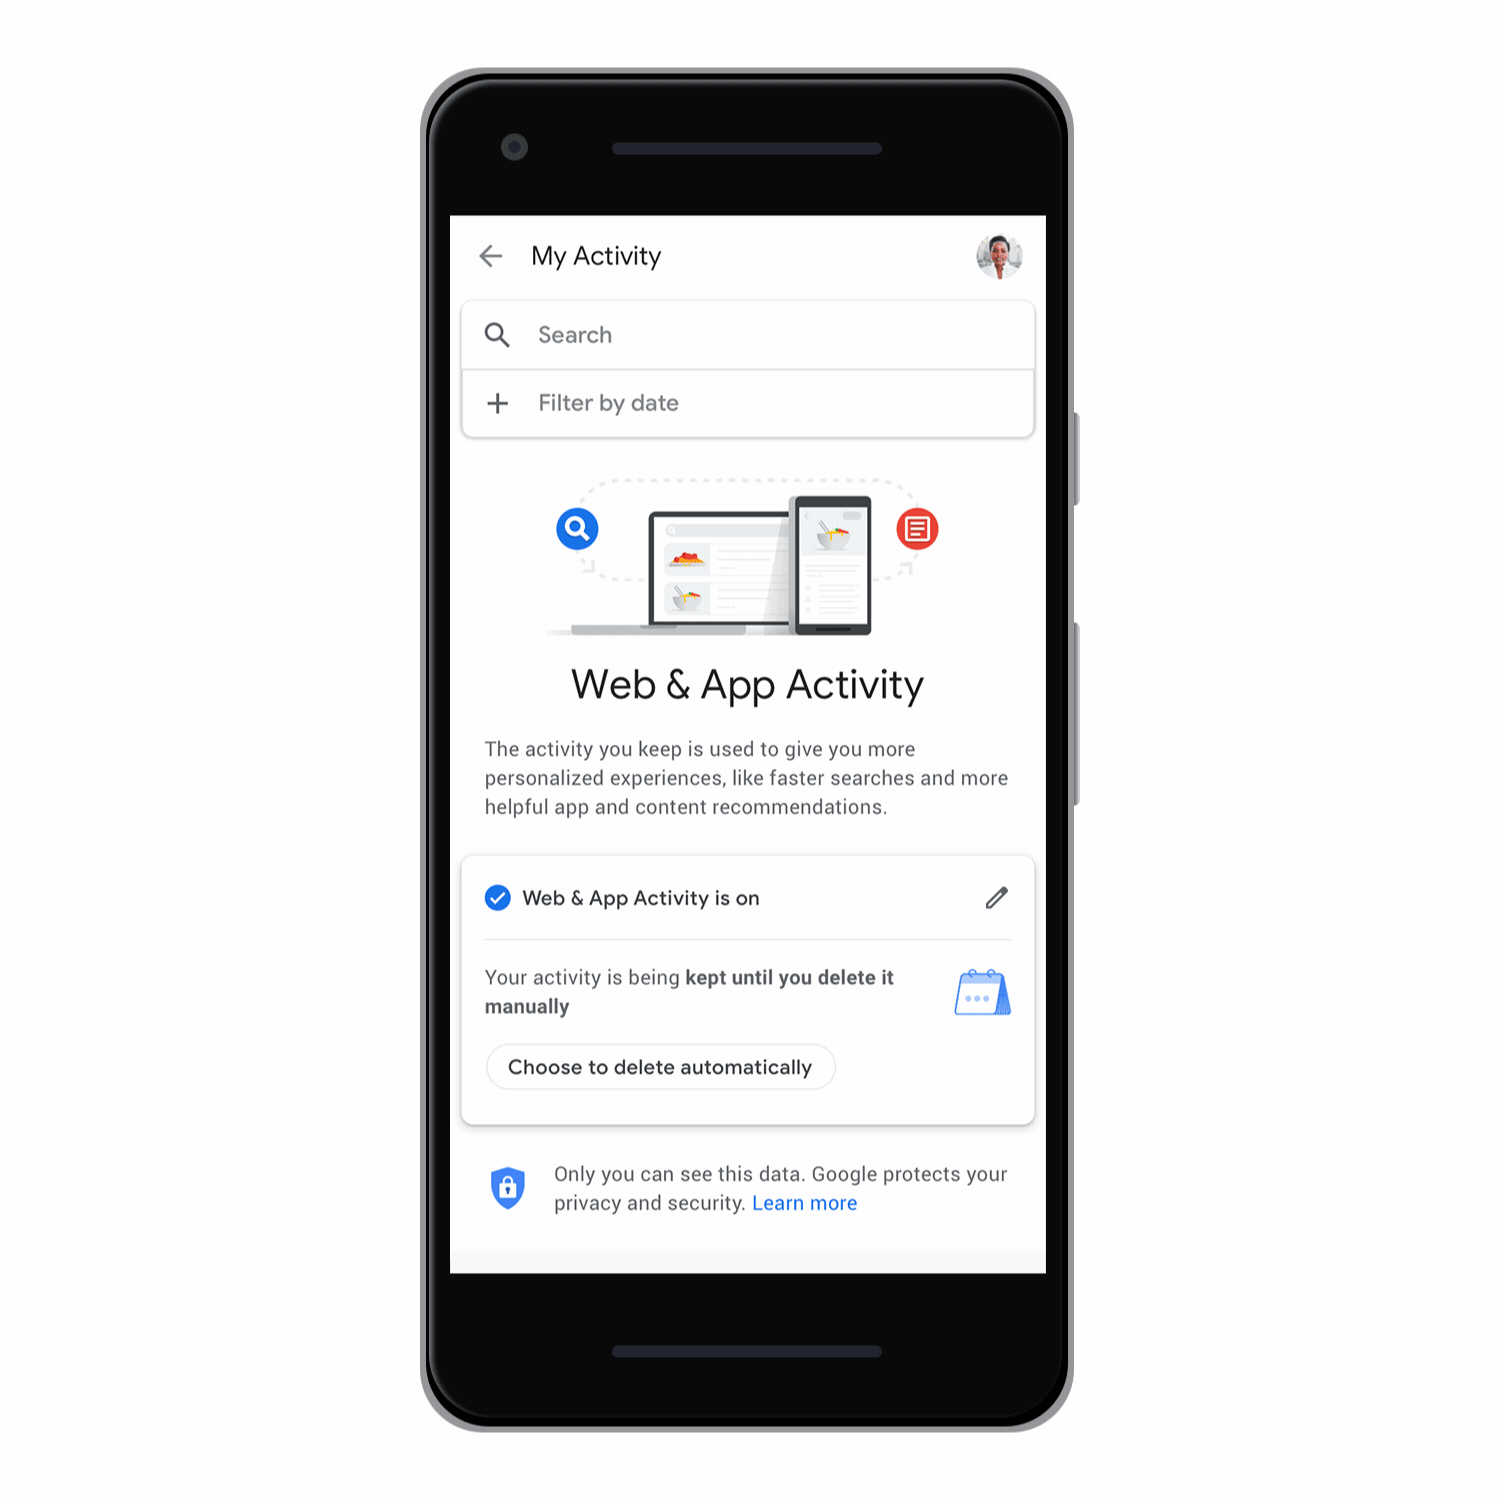 WAA-retention-flow-pixel_V3 Google is tracking your every move - here's how to auto-delete Location History